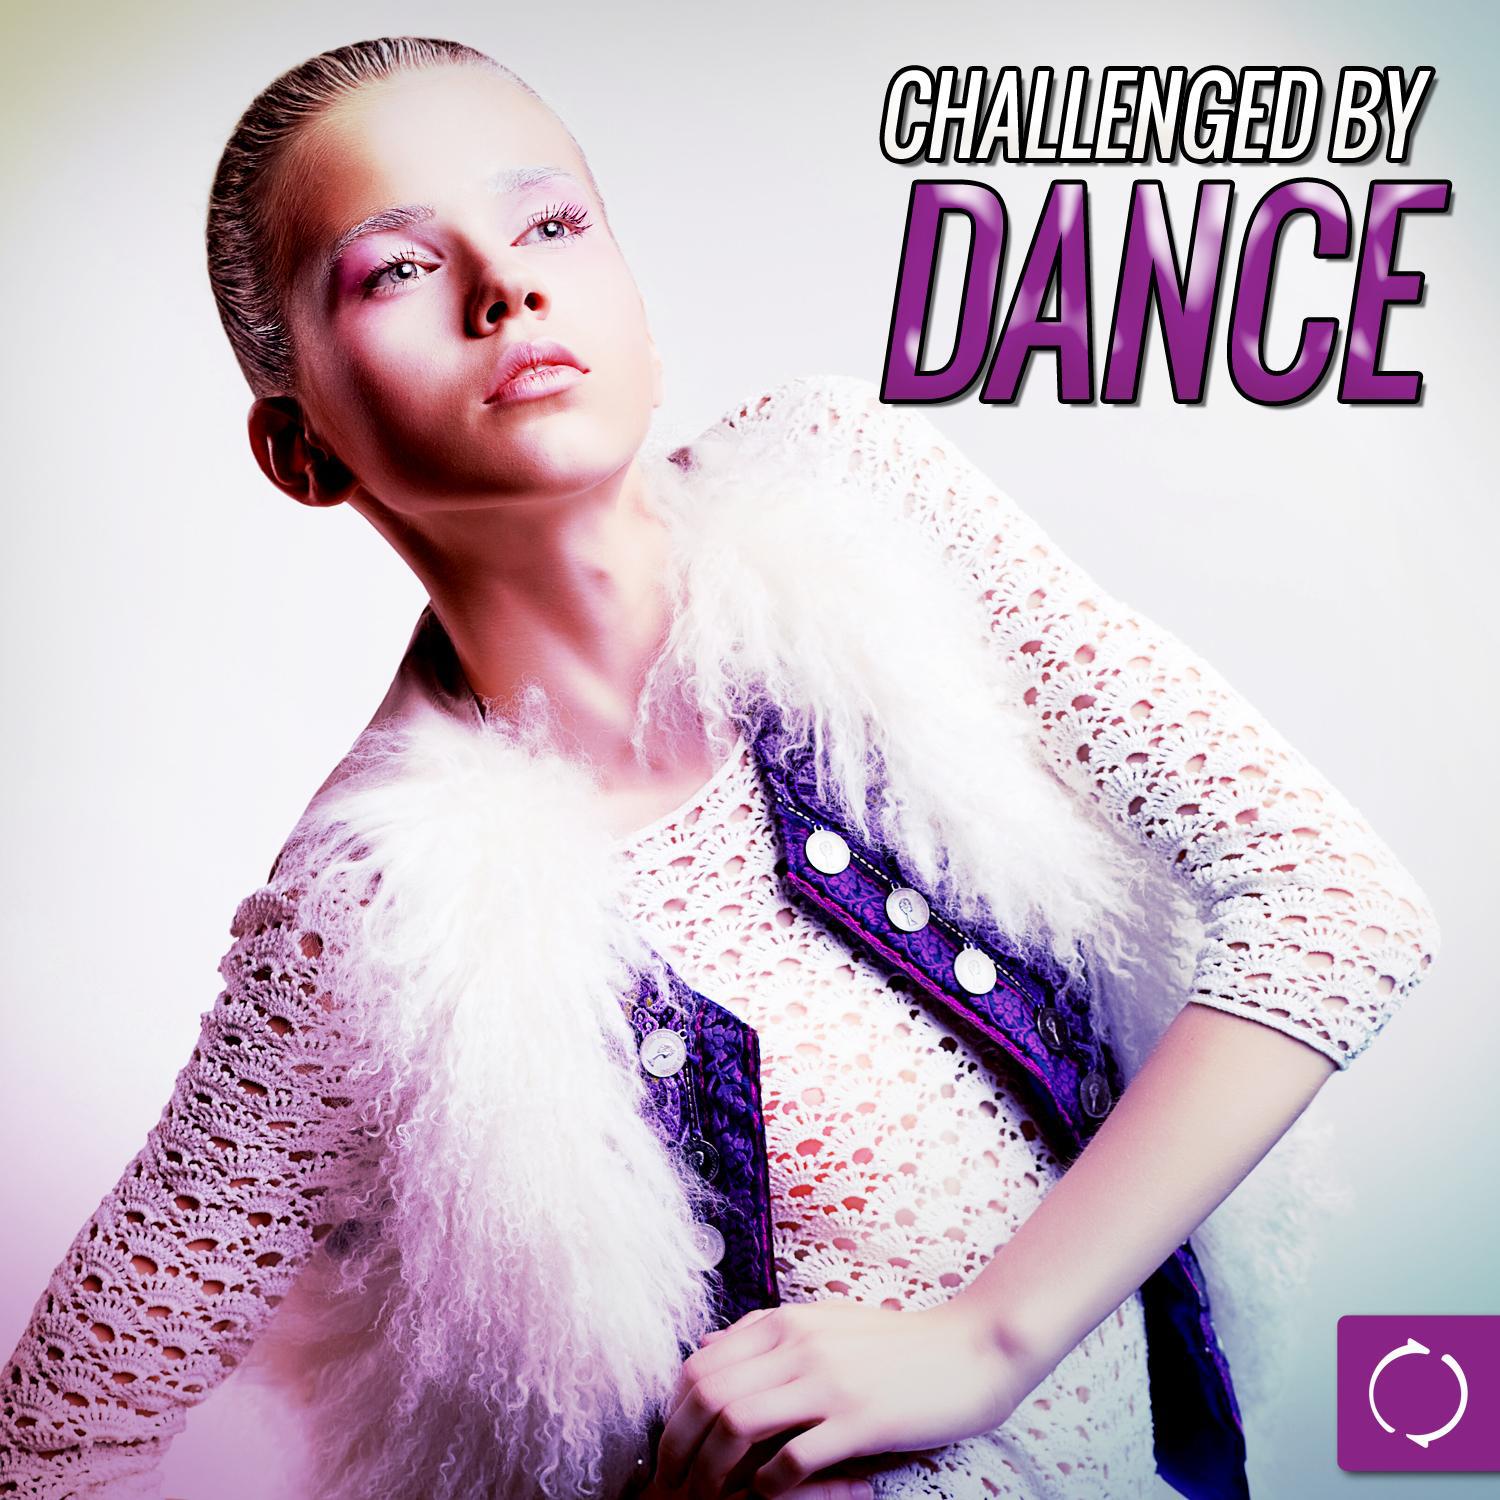 Challenged by Dance